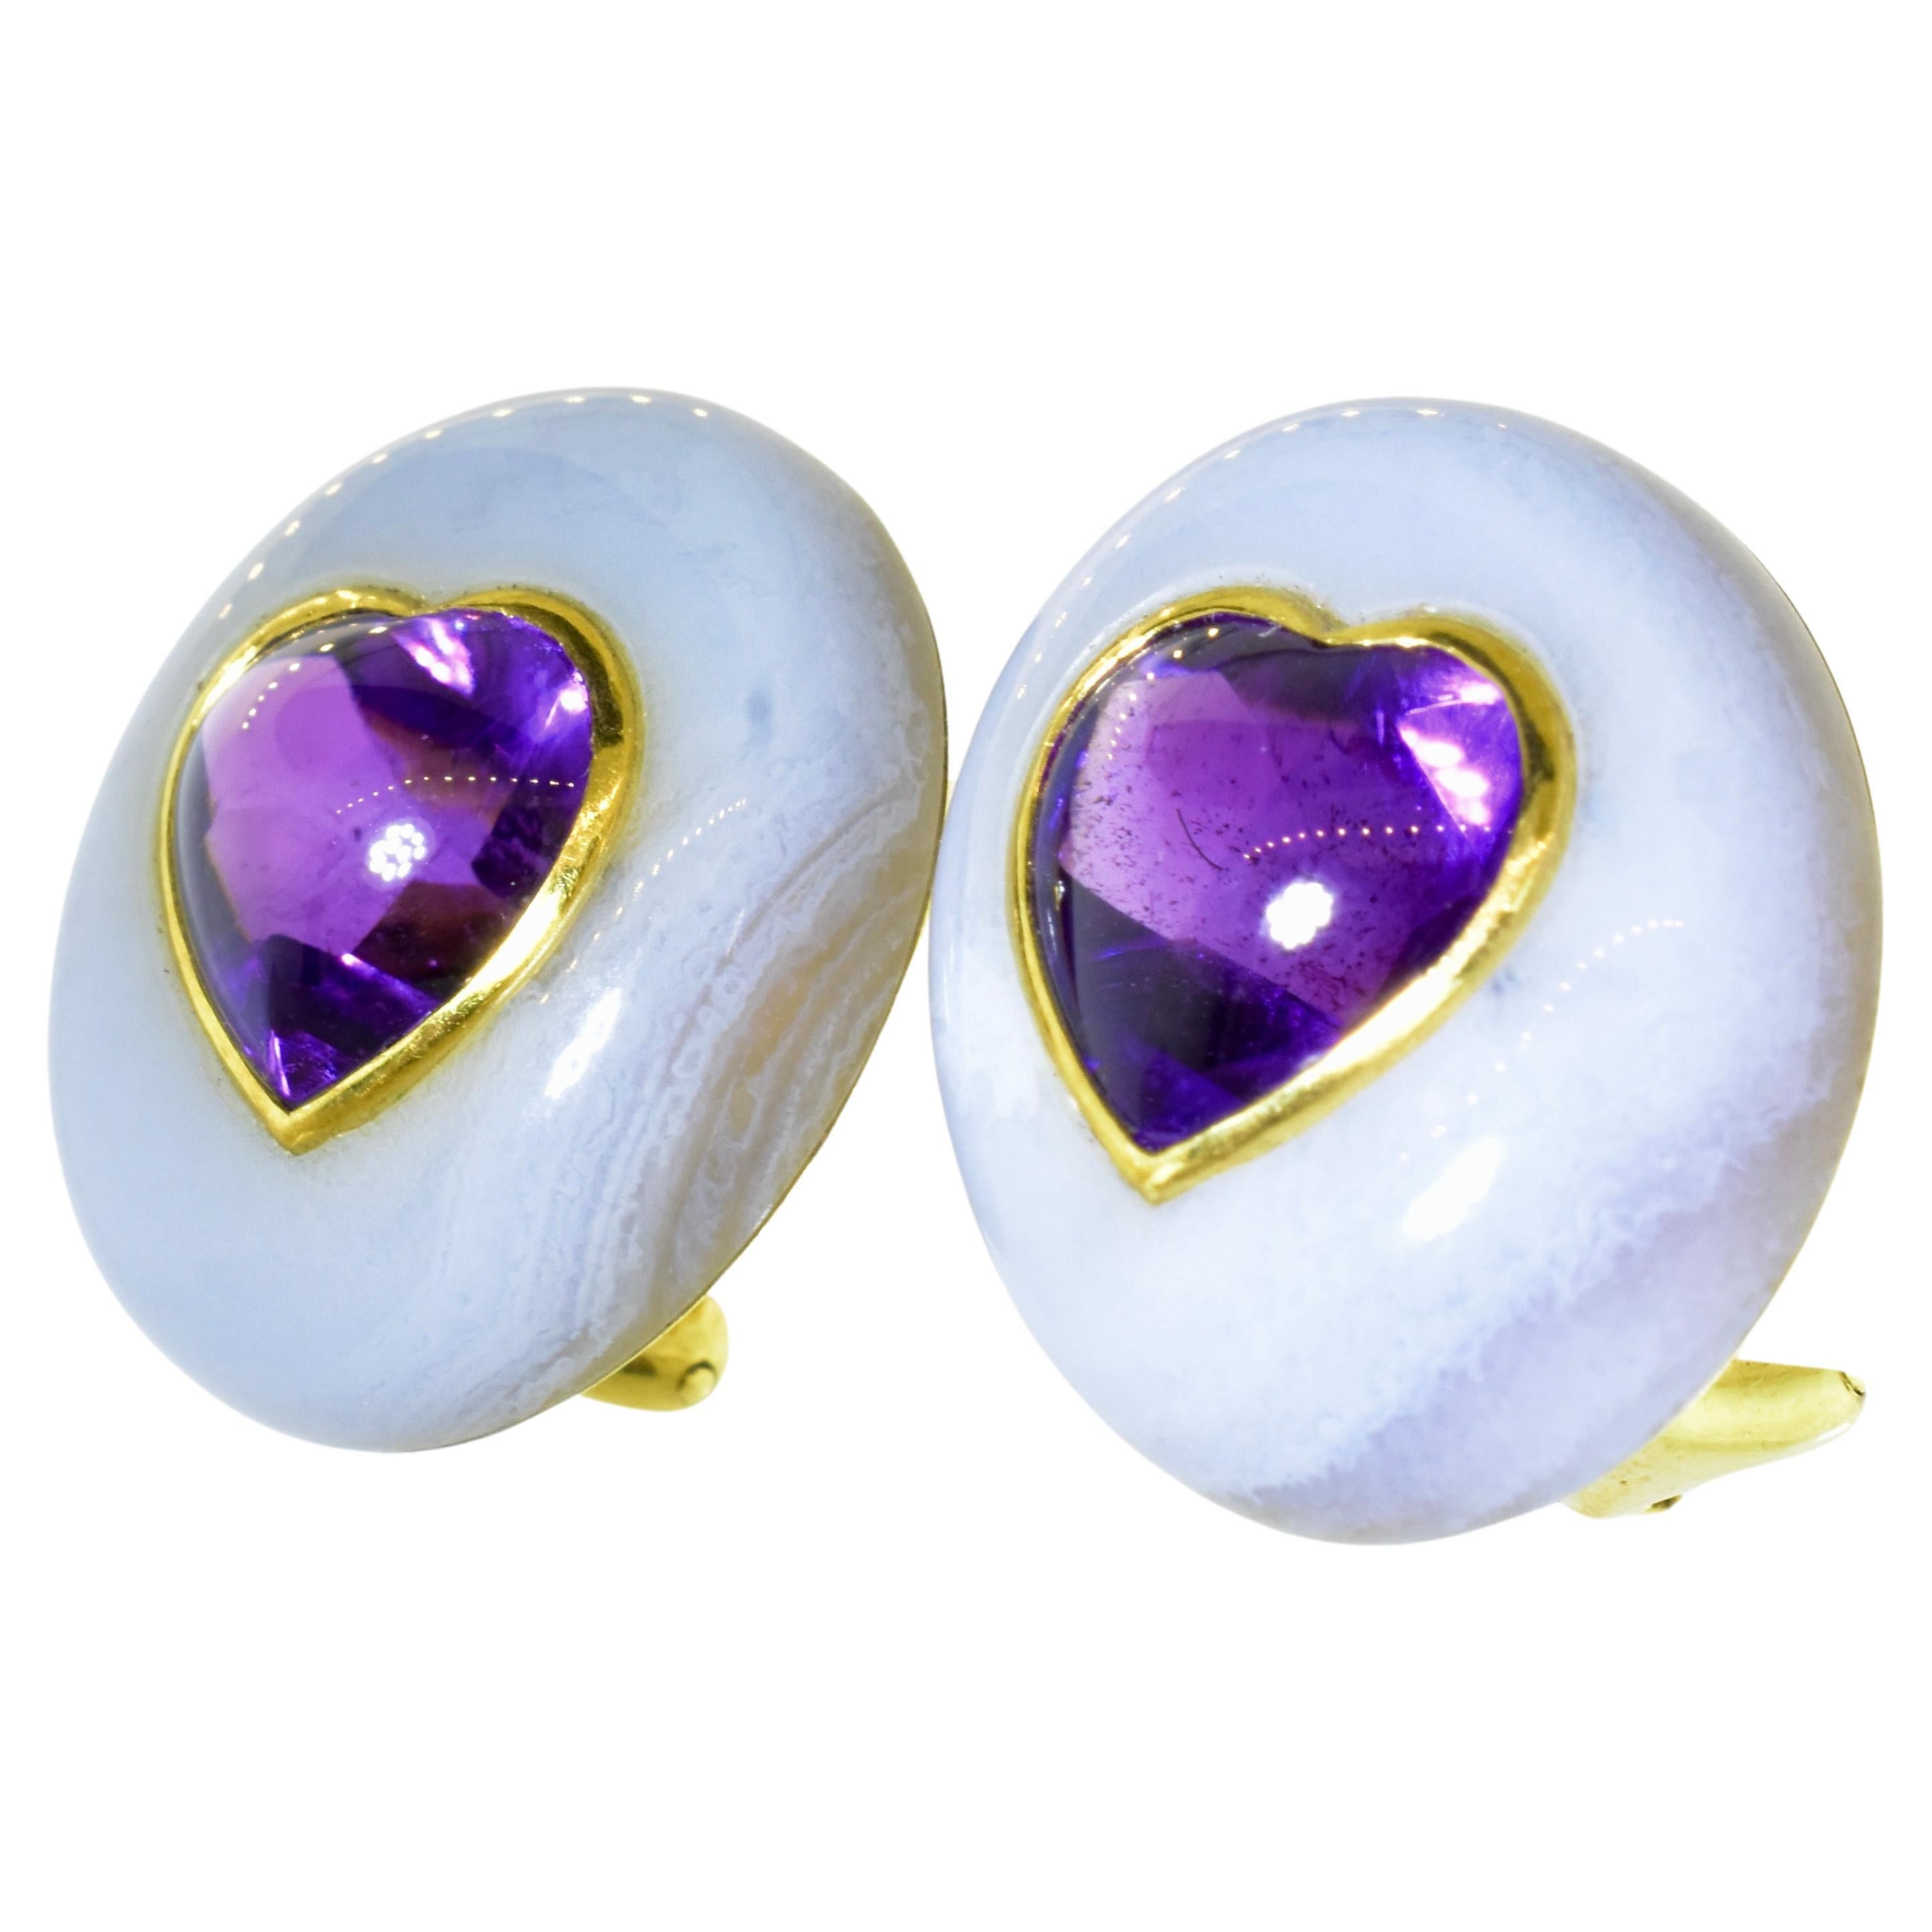 Angela Cummings, a major designer for Tiffany & Co., has designed these very unusual and remarkable 18K yellow gold, amethyst and agate earrings are by Angela Cummings, they are slightly less than 1 inch in length and .75 inches in their width. 